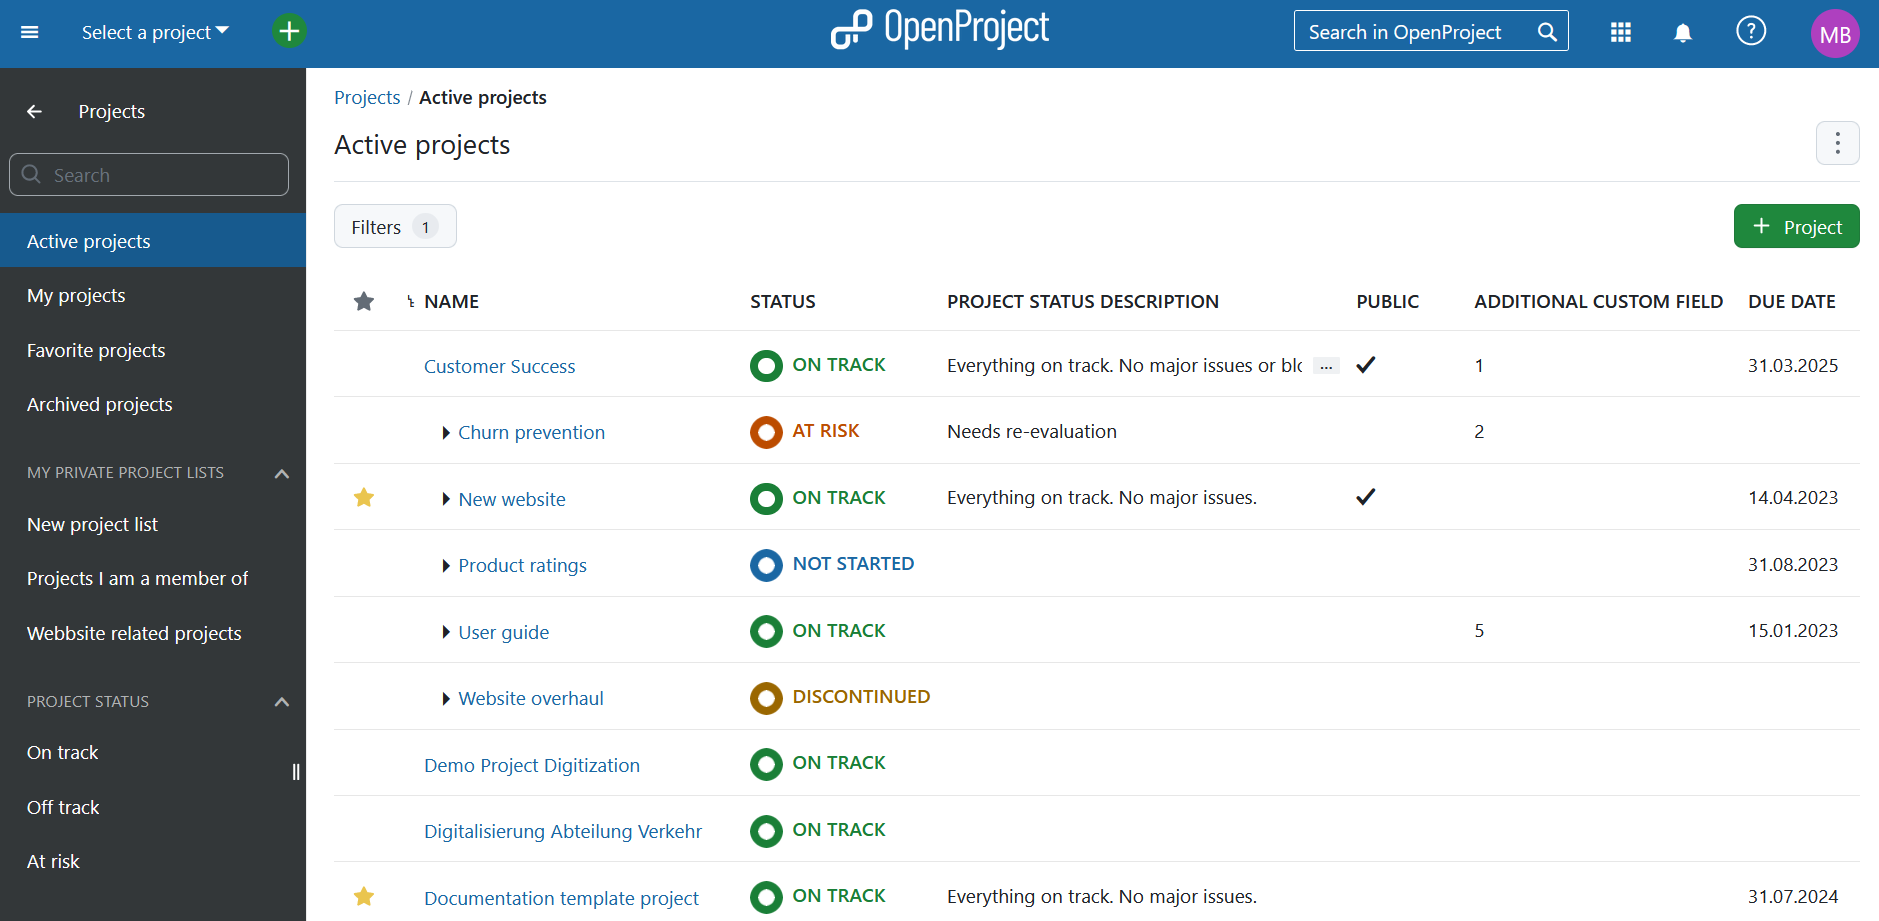 OpenProject projects overview in the global modules menu